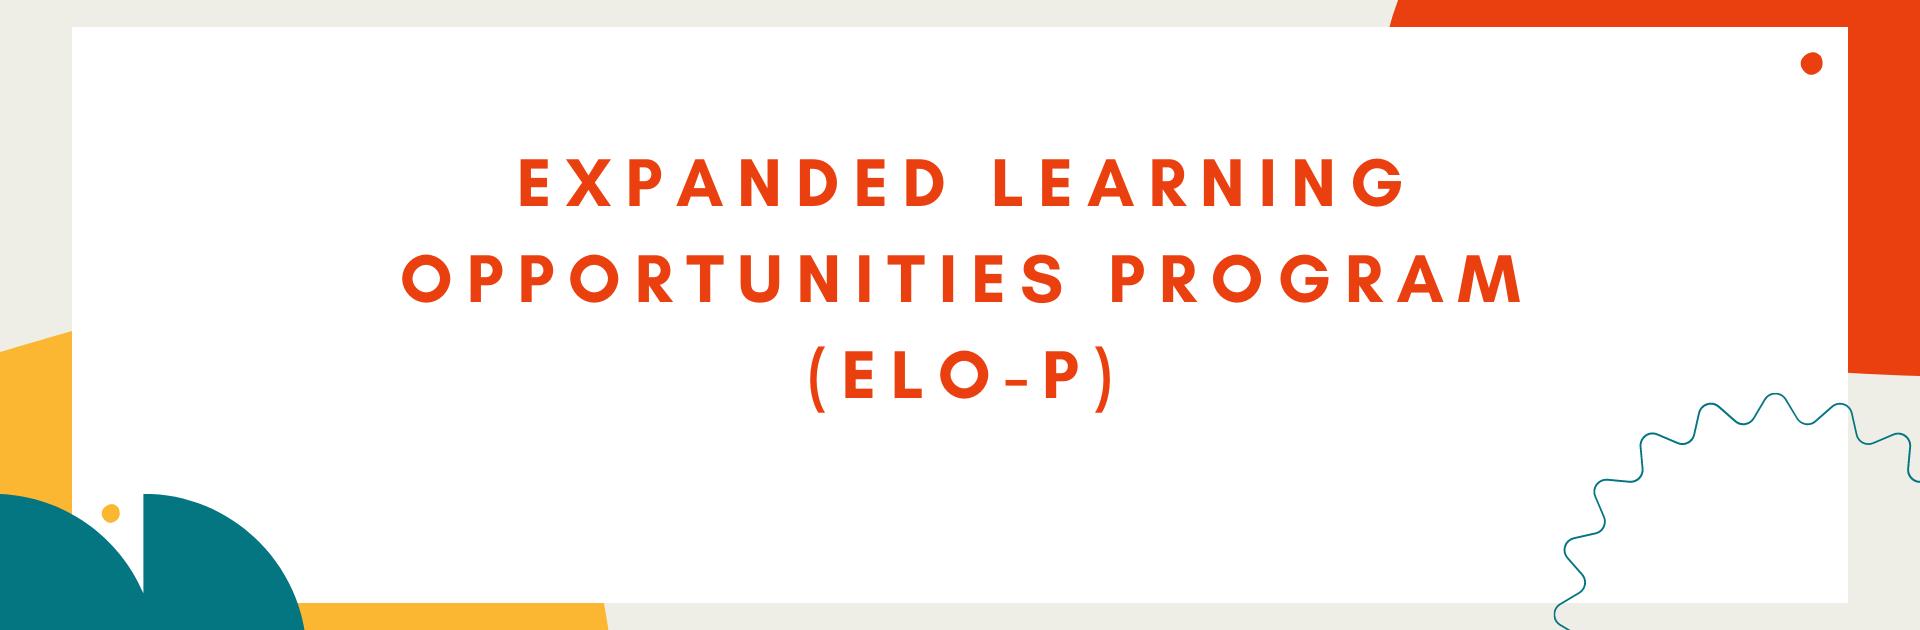 Expanded Learning Opportunities Program (ELO-P)